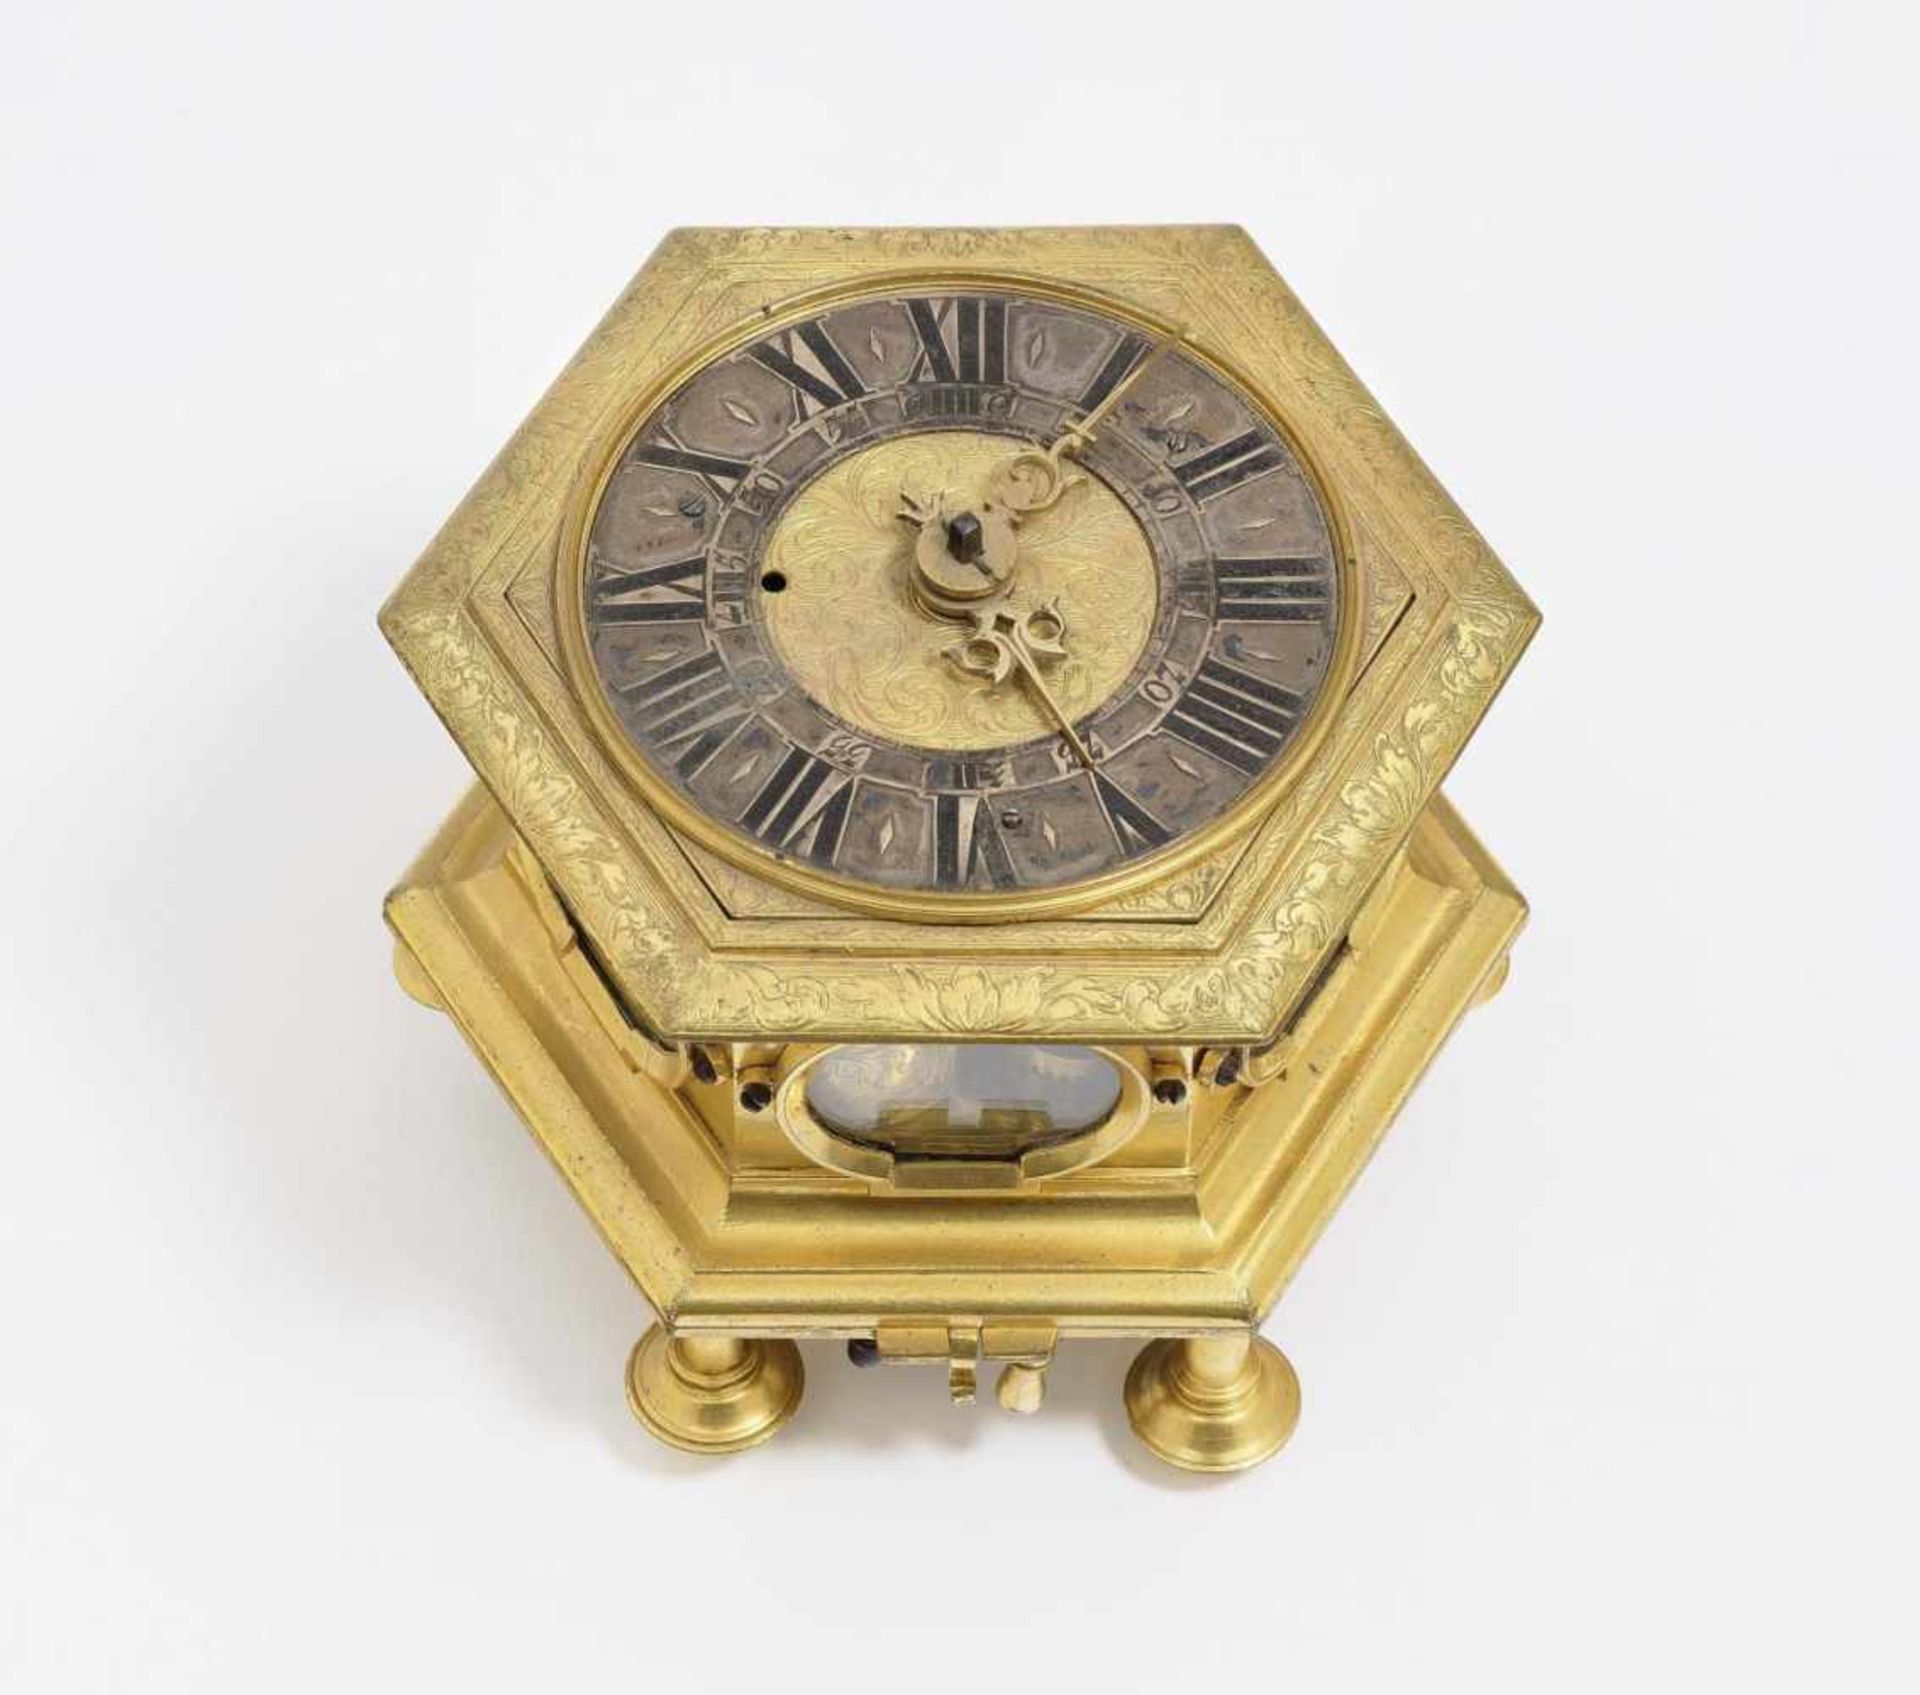 A Horizontal Table ClockAugsburg, circa 1700, Jacob Mayr Fire-gilded bronze. Six-sided case with